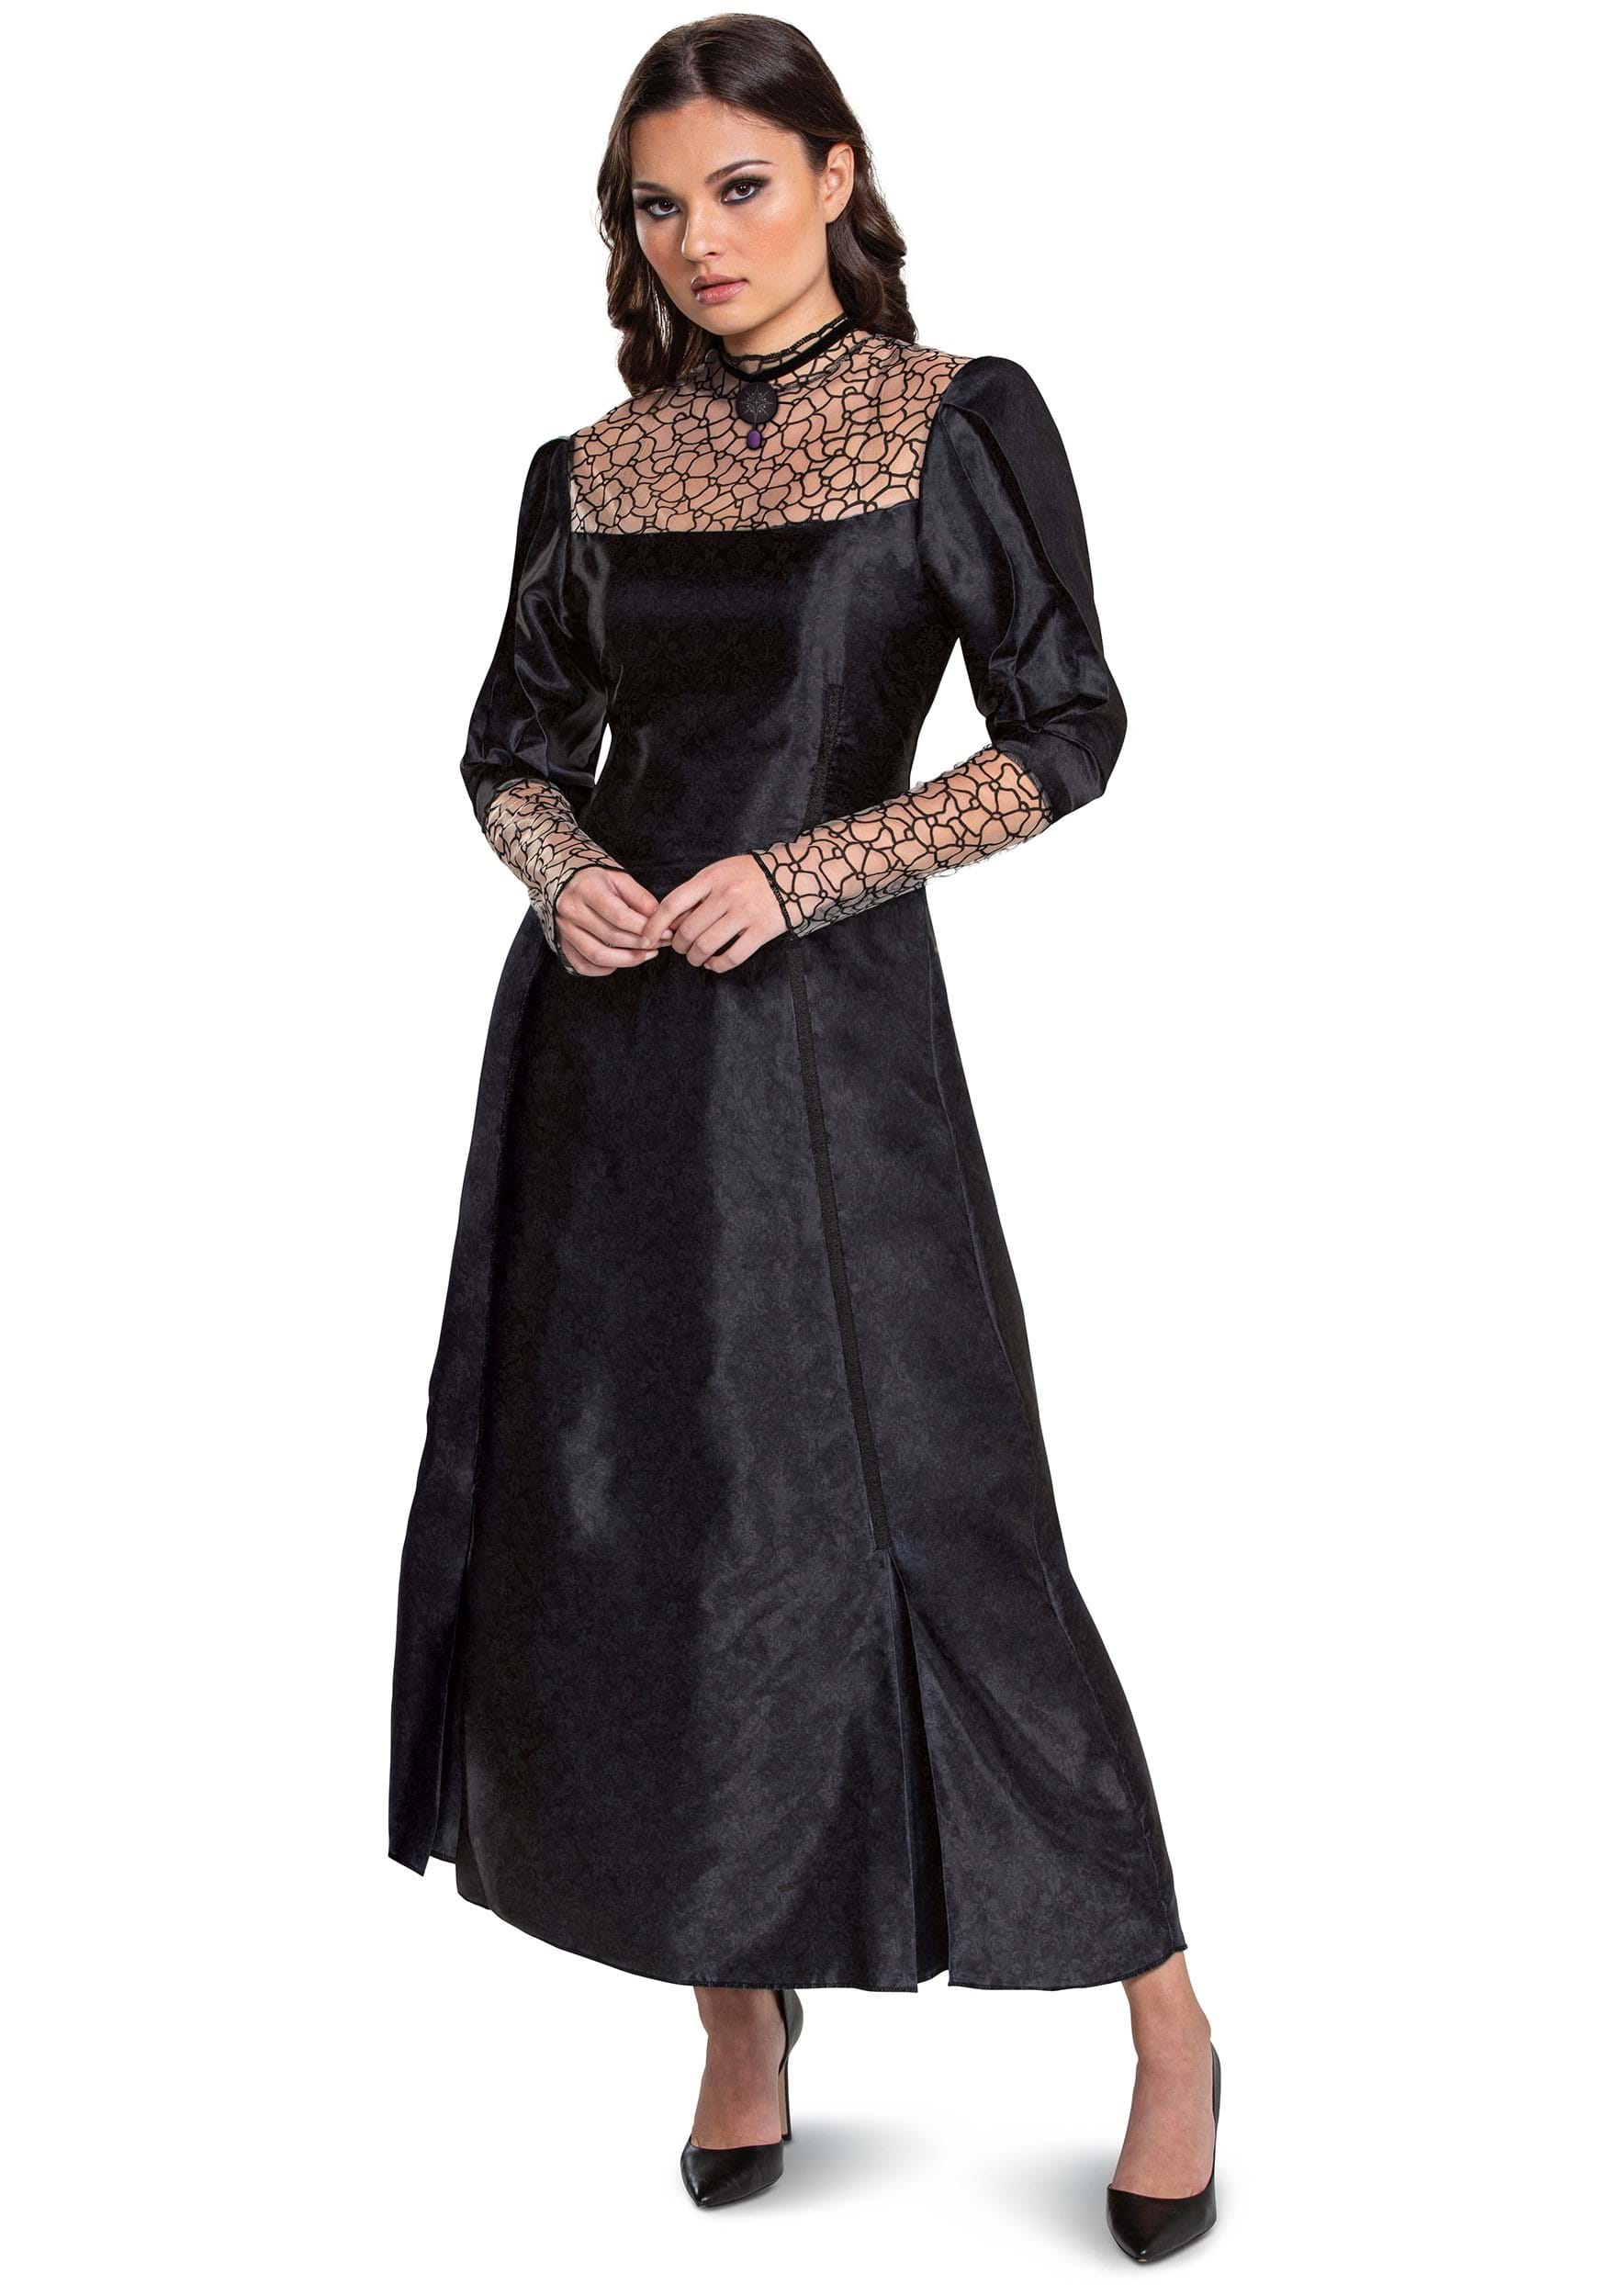 Image of Women's The Witcher Classic Yennefer Costume ID DI123819-XL